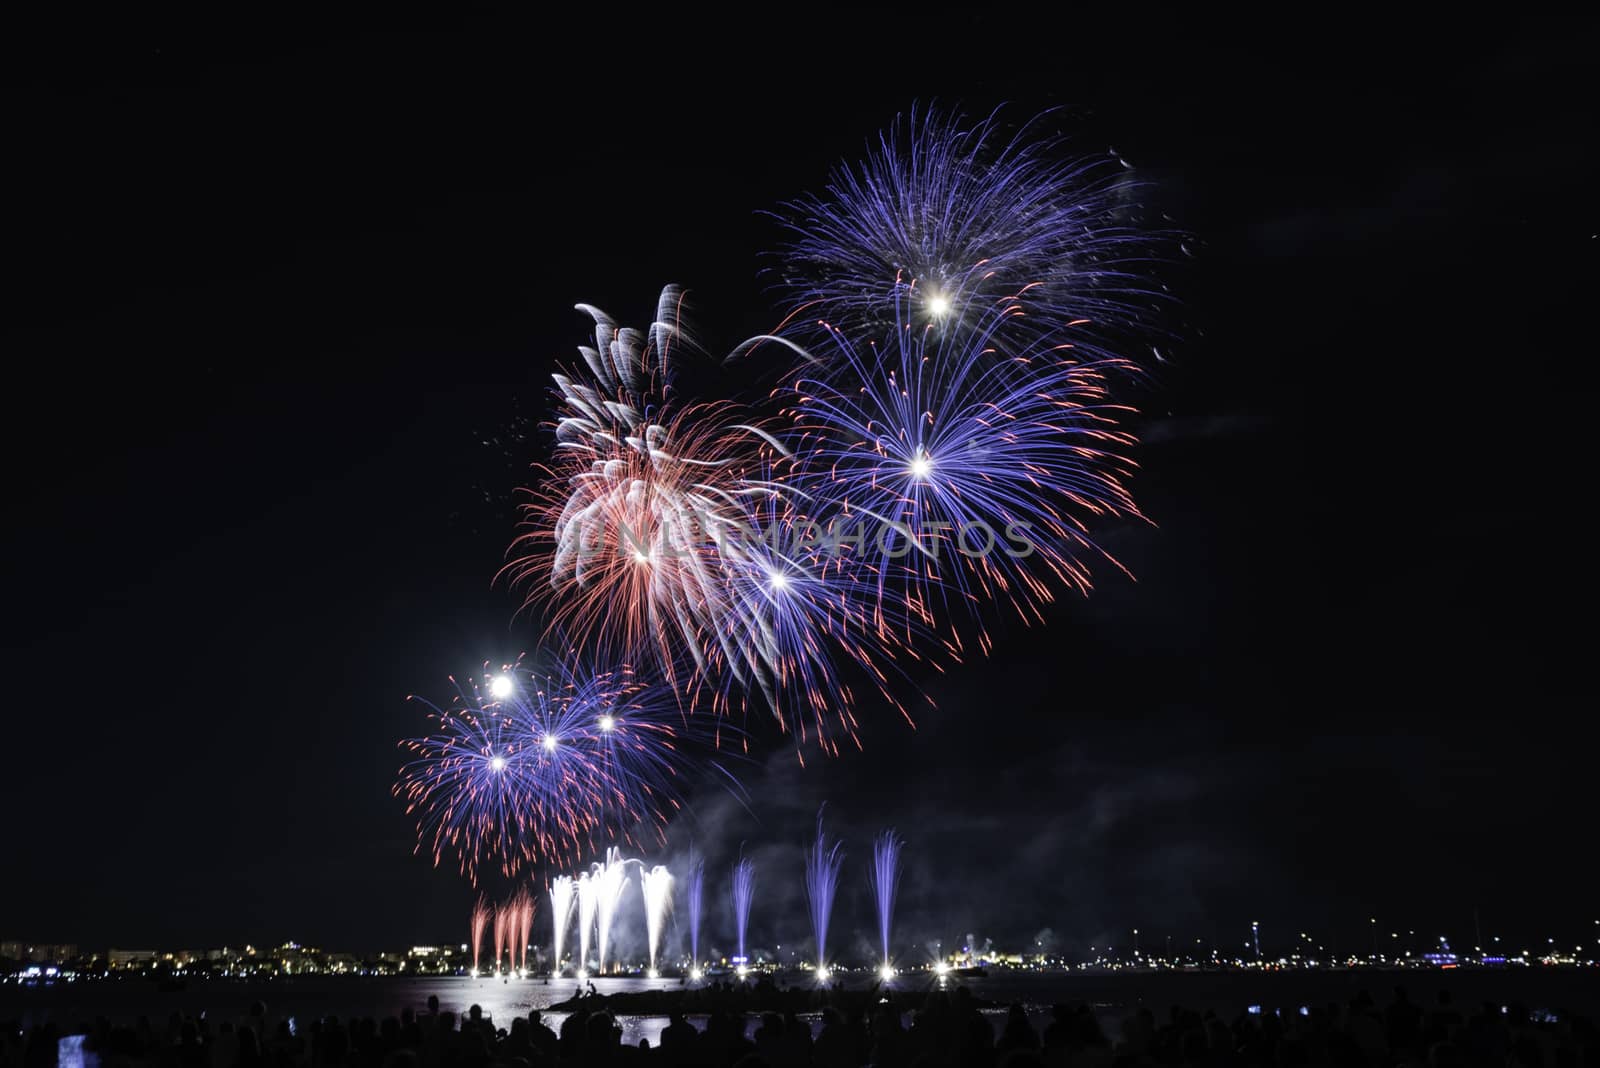 Scenic fireworks at night in the harbor of Cannes, France by marcorubino